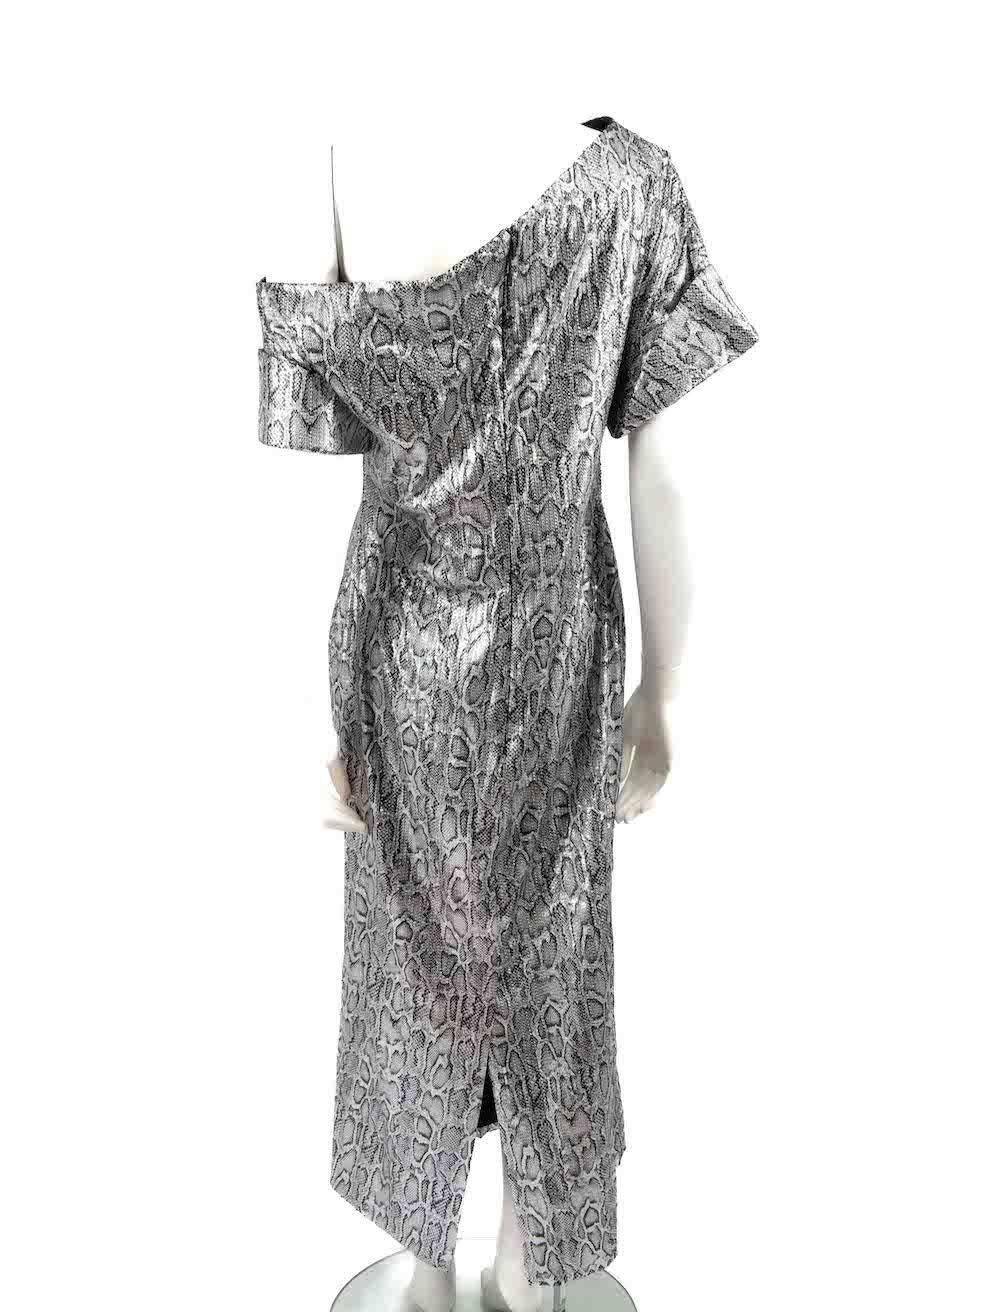 Christopher Kane Silver Snakeskin Sequin Midi Dress Size XL In New Condition For Sale In London, GB